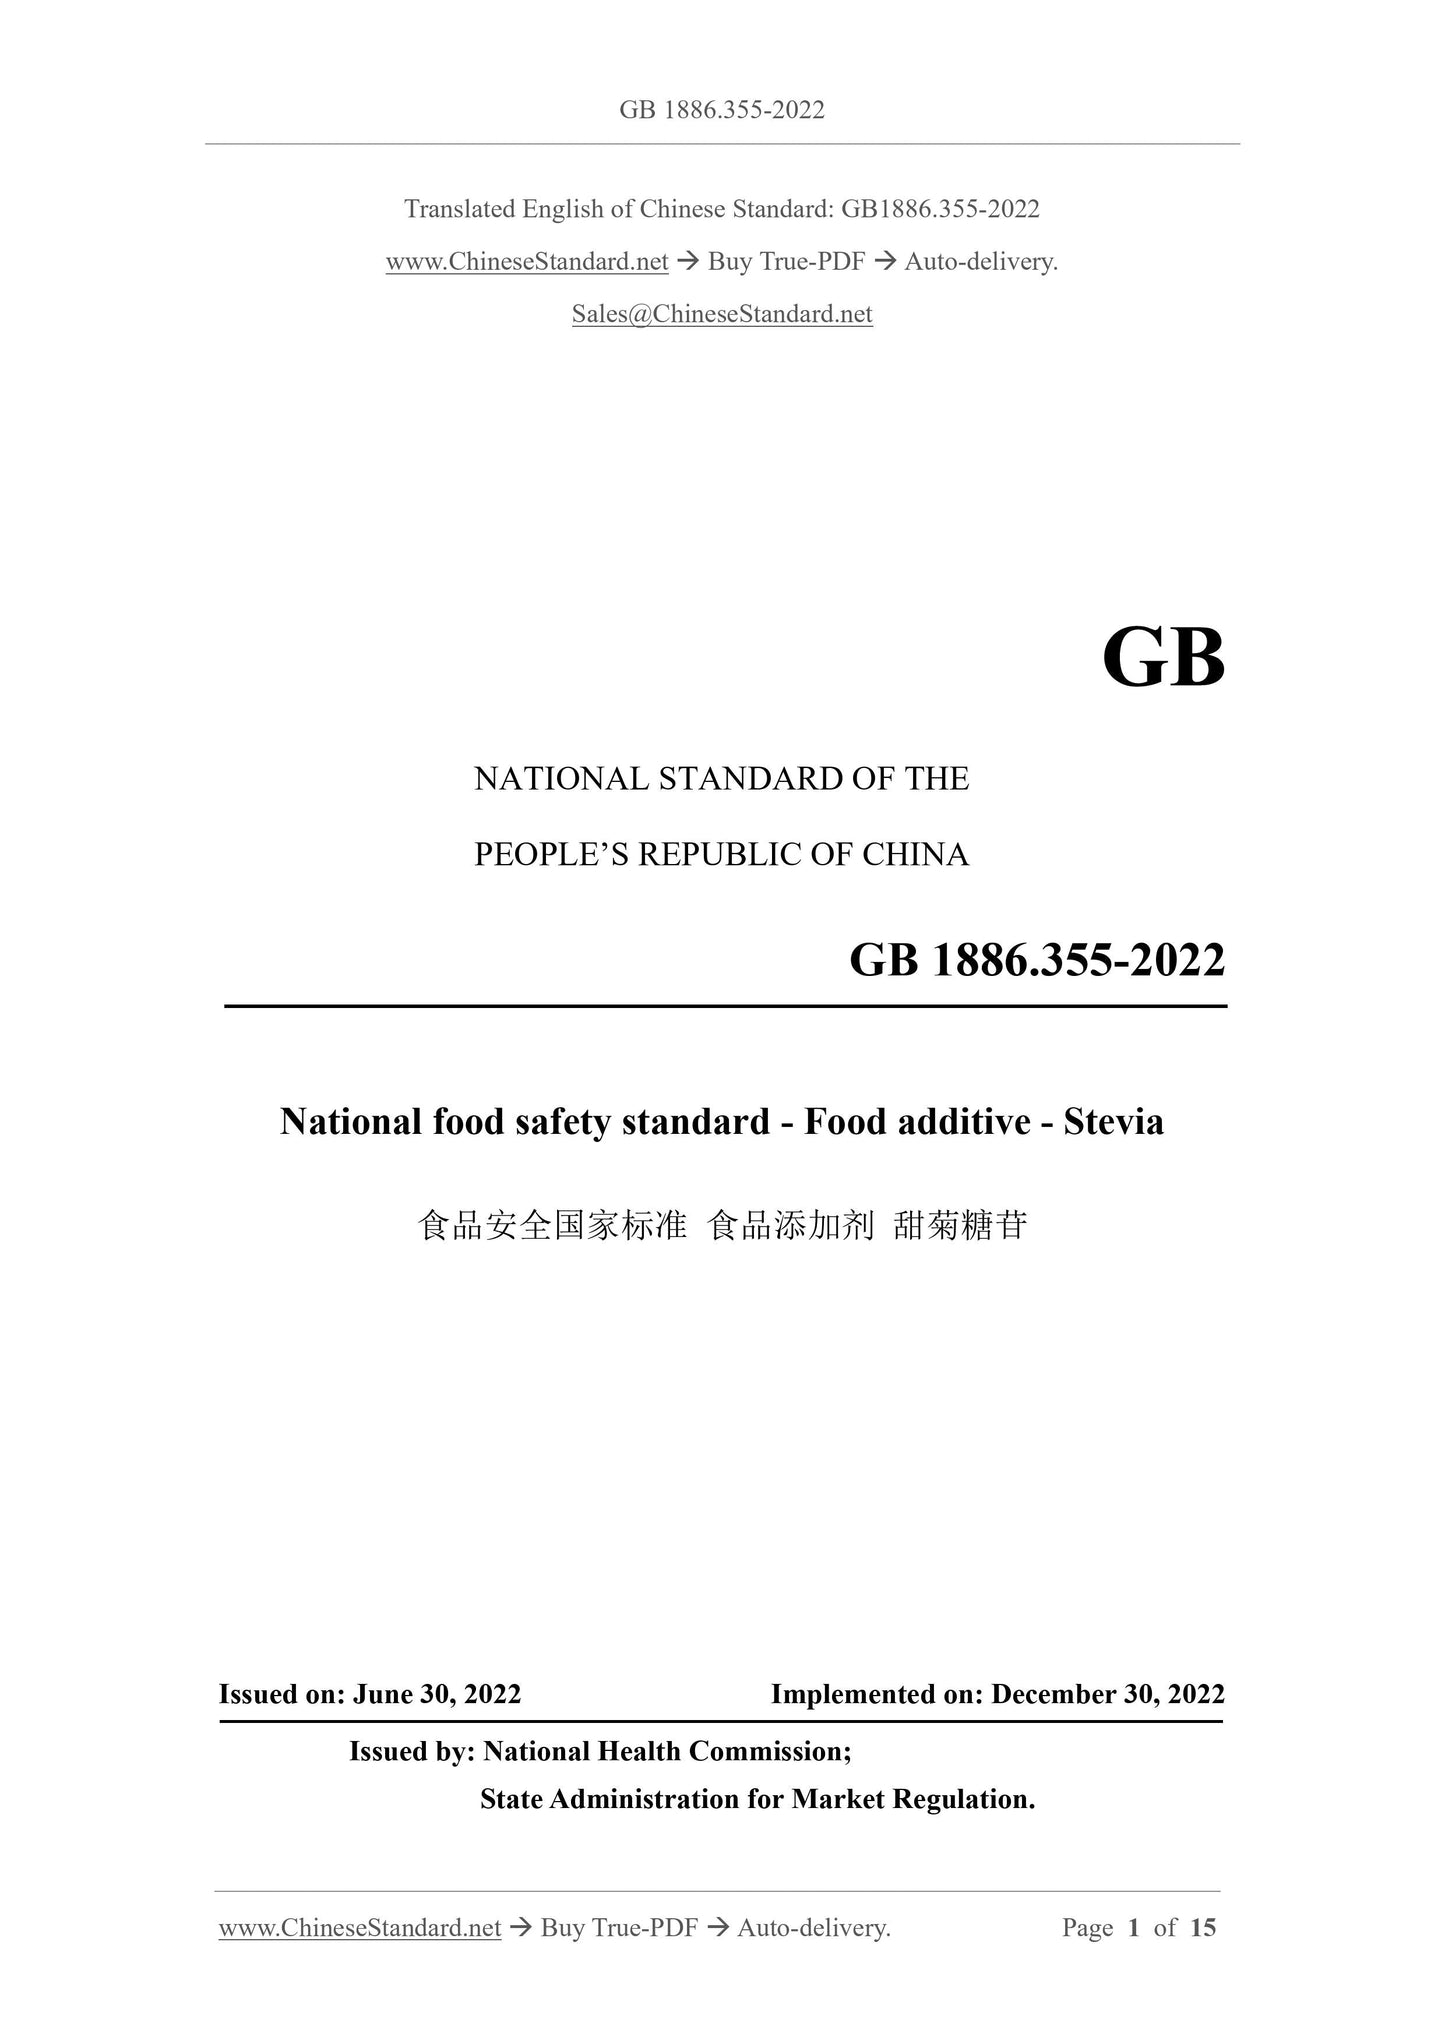 GB 1886.355-2022 Page 1